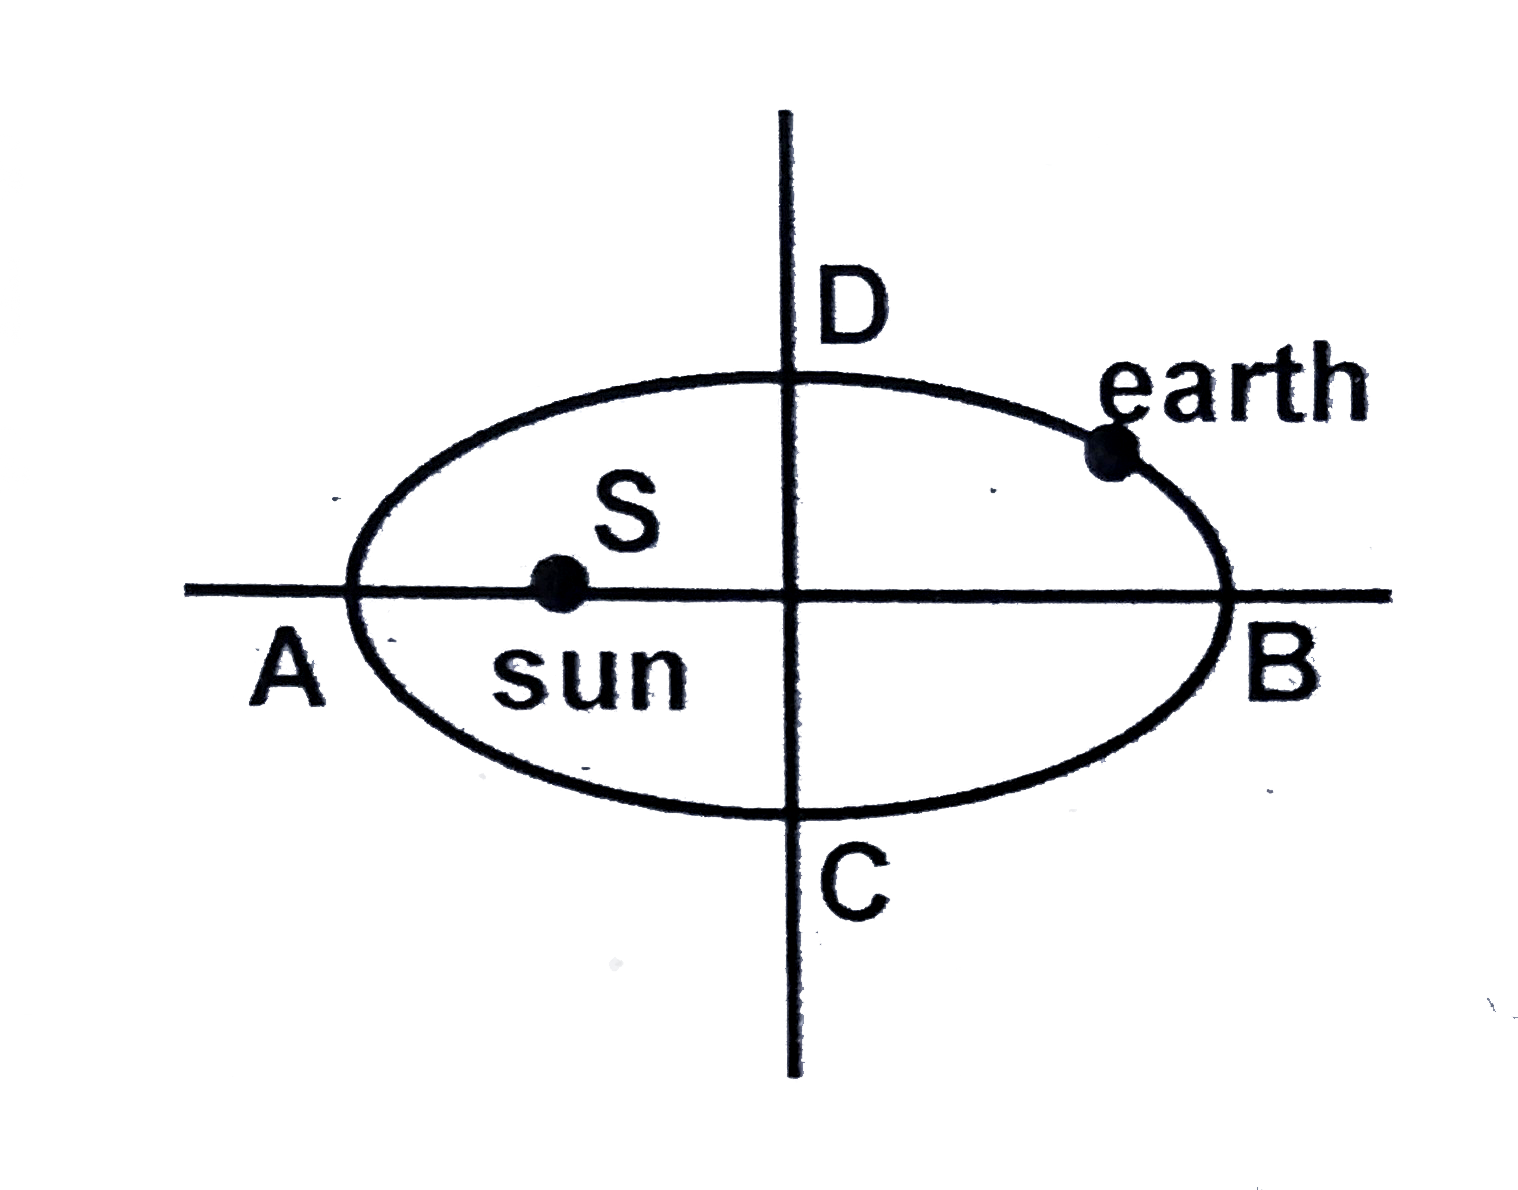 The earth is moving on an elliptical path, whose one focus sun is situated as shown in figure. If AS = r(min) and SB = r(max), the sun and earth system obey the Kepler's law, the square of time-period is directly proportional to